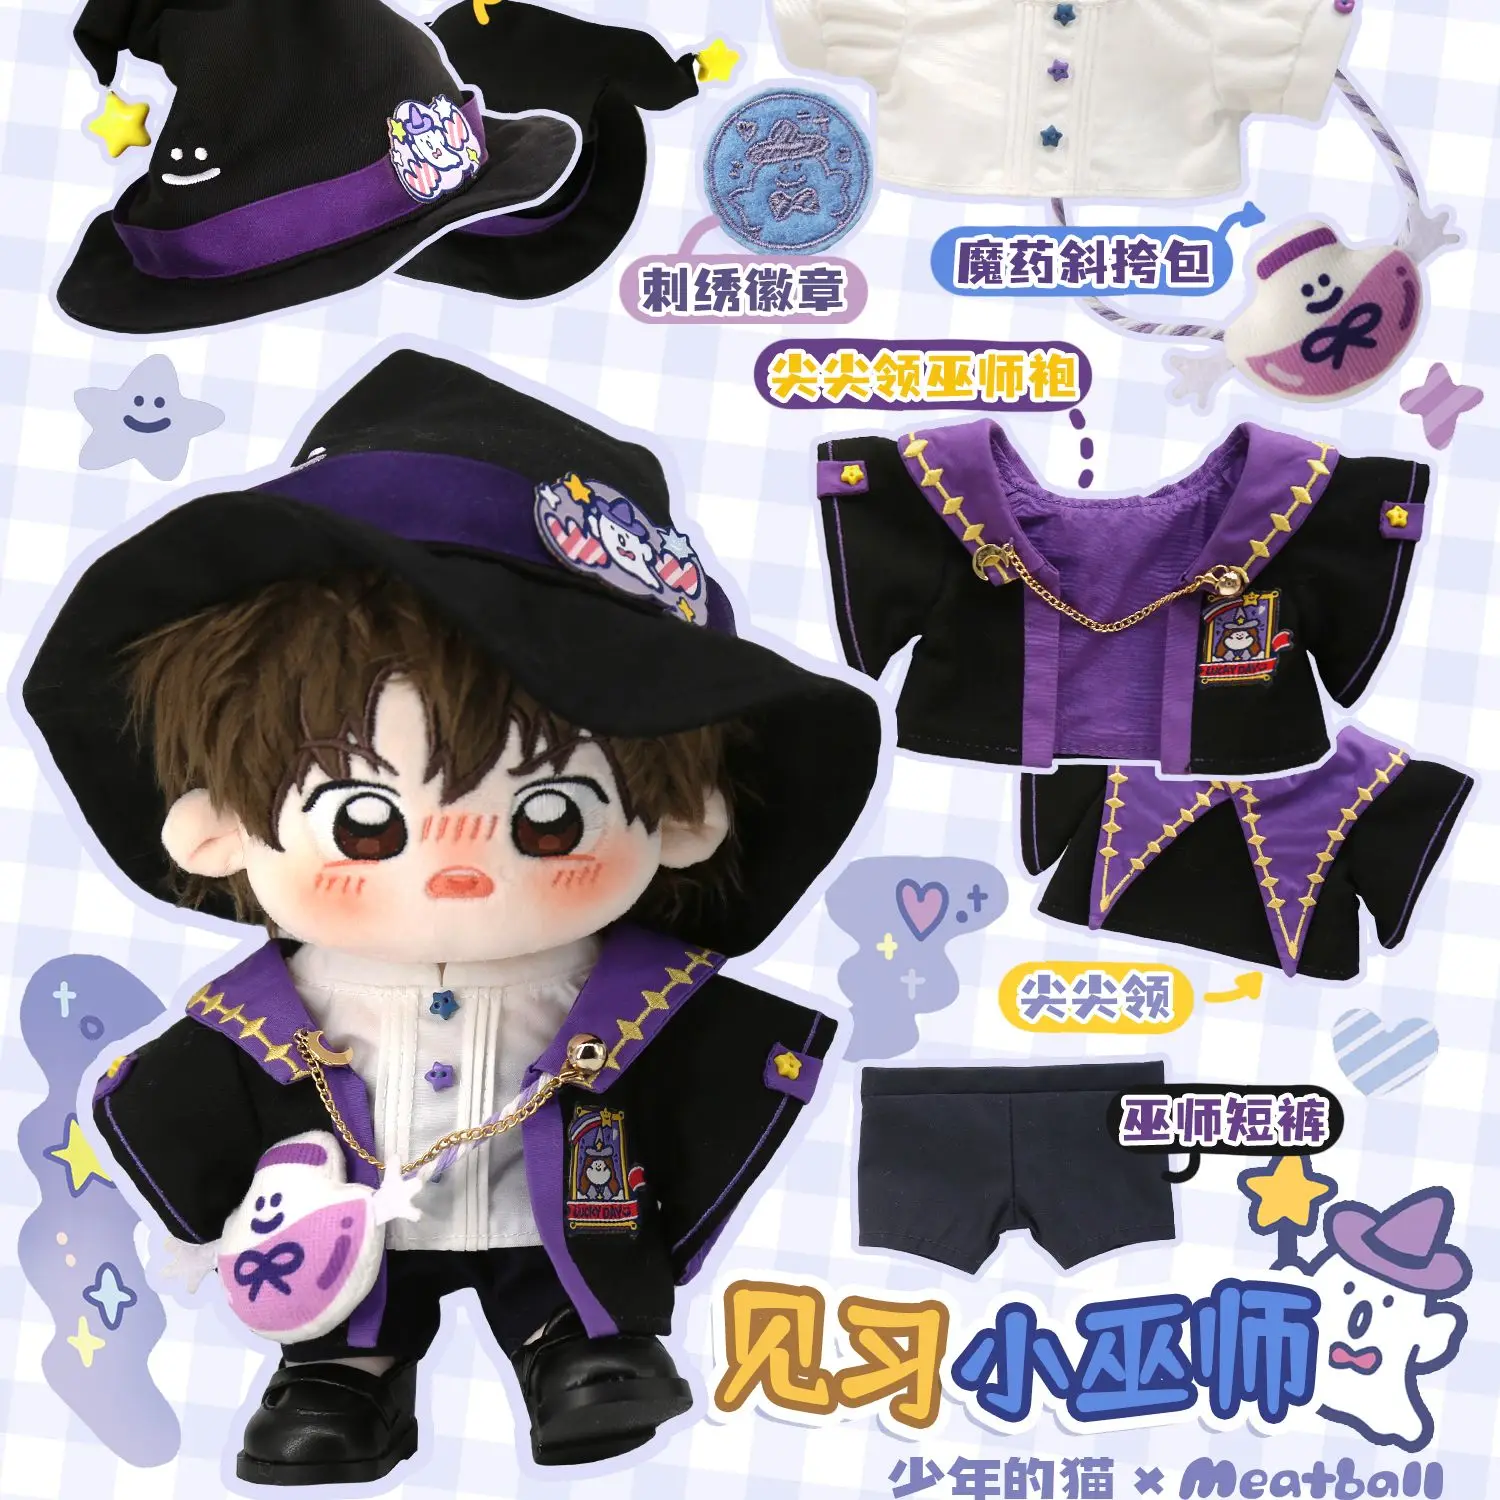 

Original Design Cute Wizard Devil Girl Suit Clothing Costume 20cm Cotton Doll Change Clothes Outfit Toy Cosplay Prop Kpop Gift